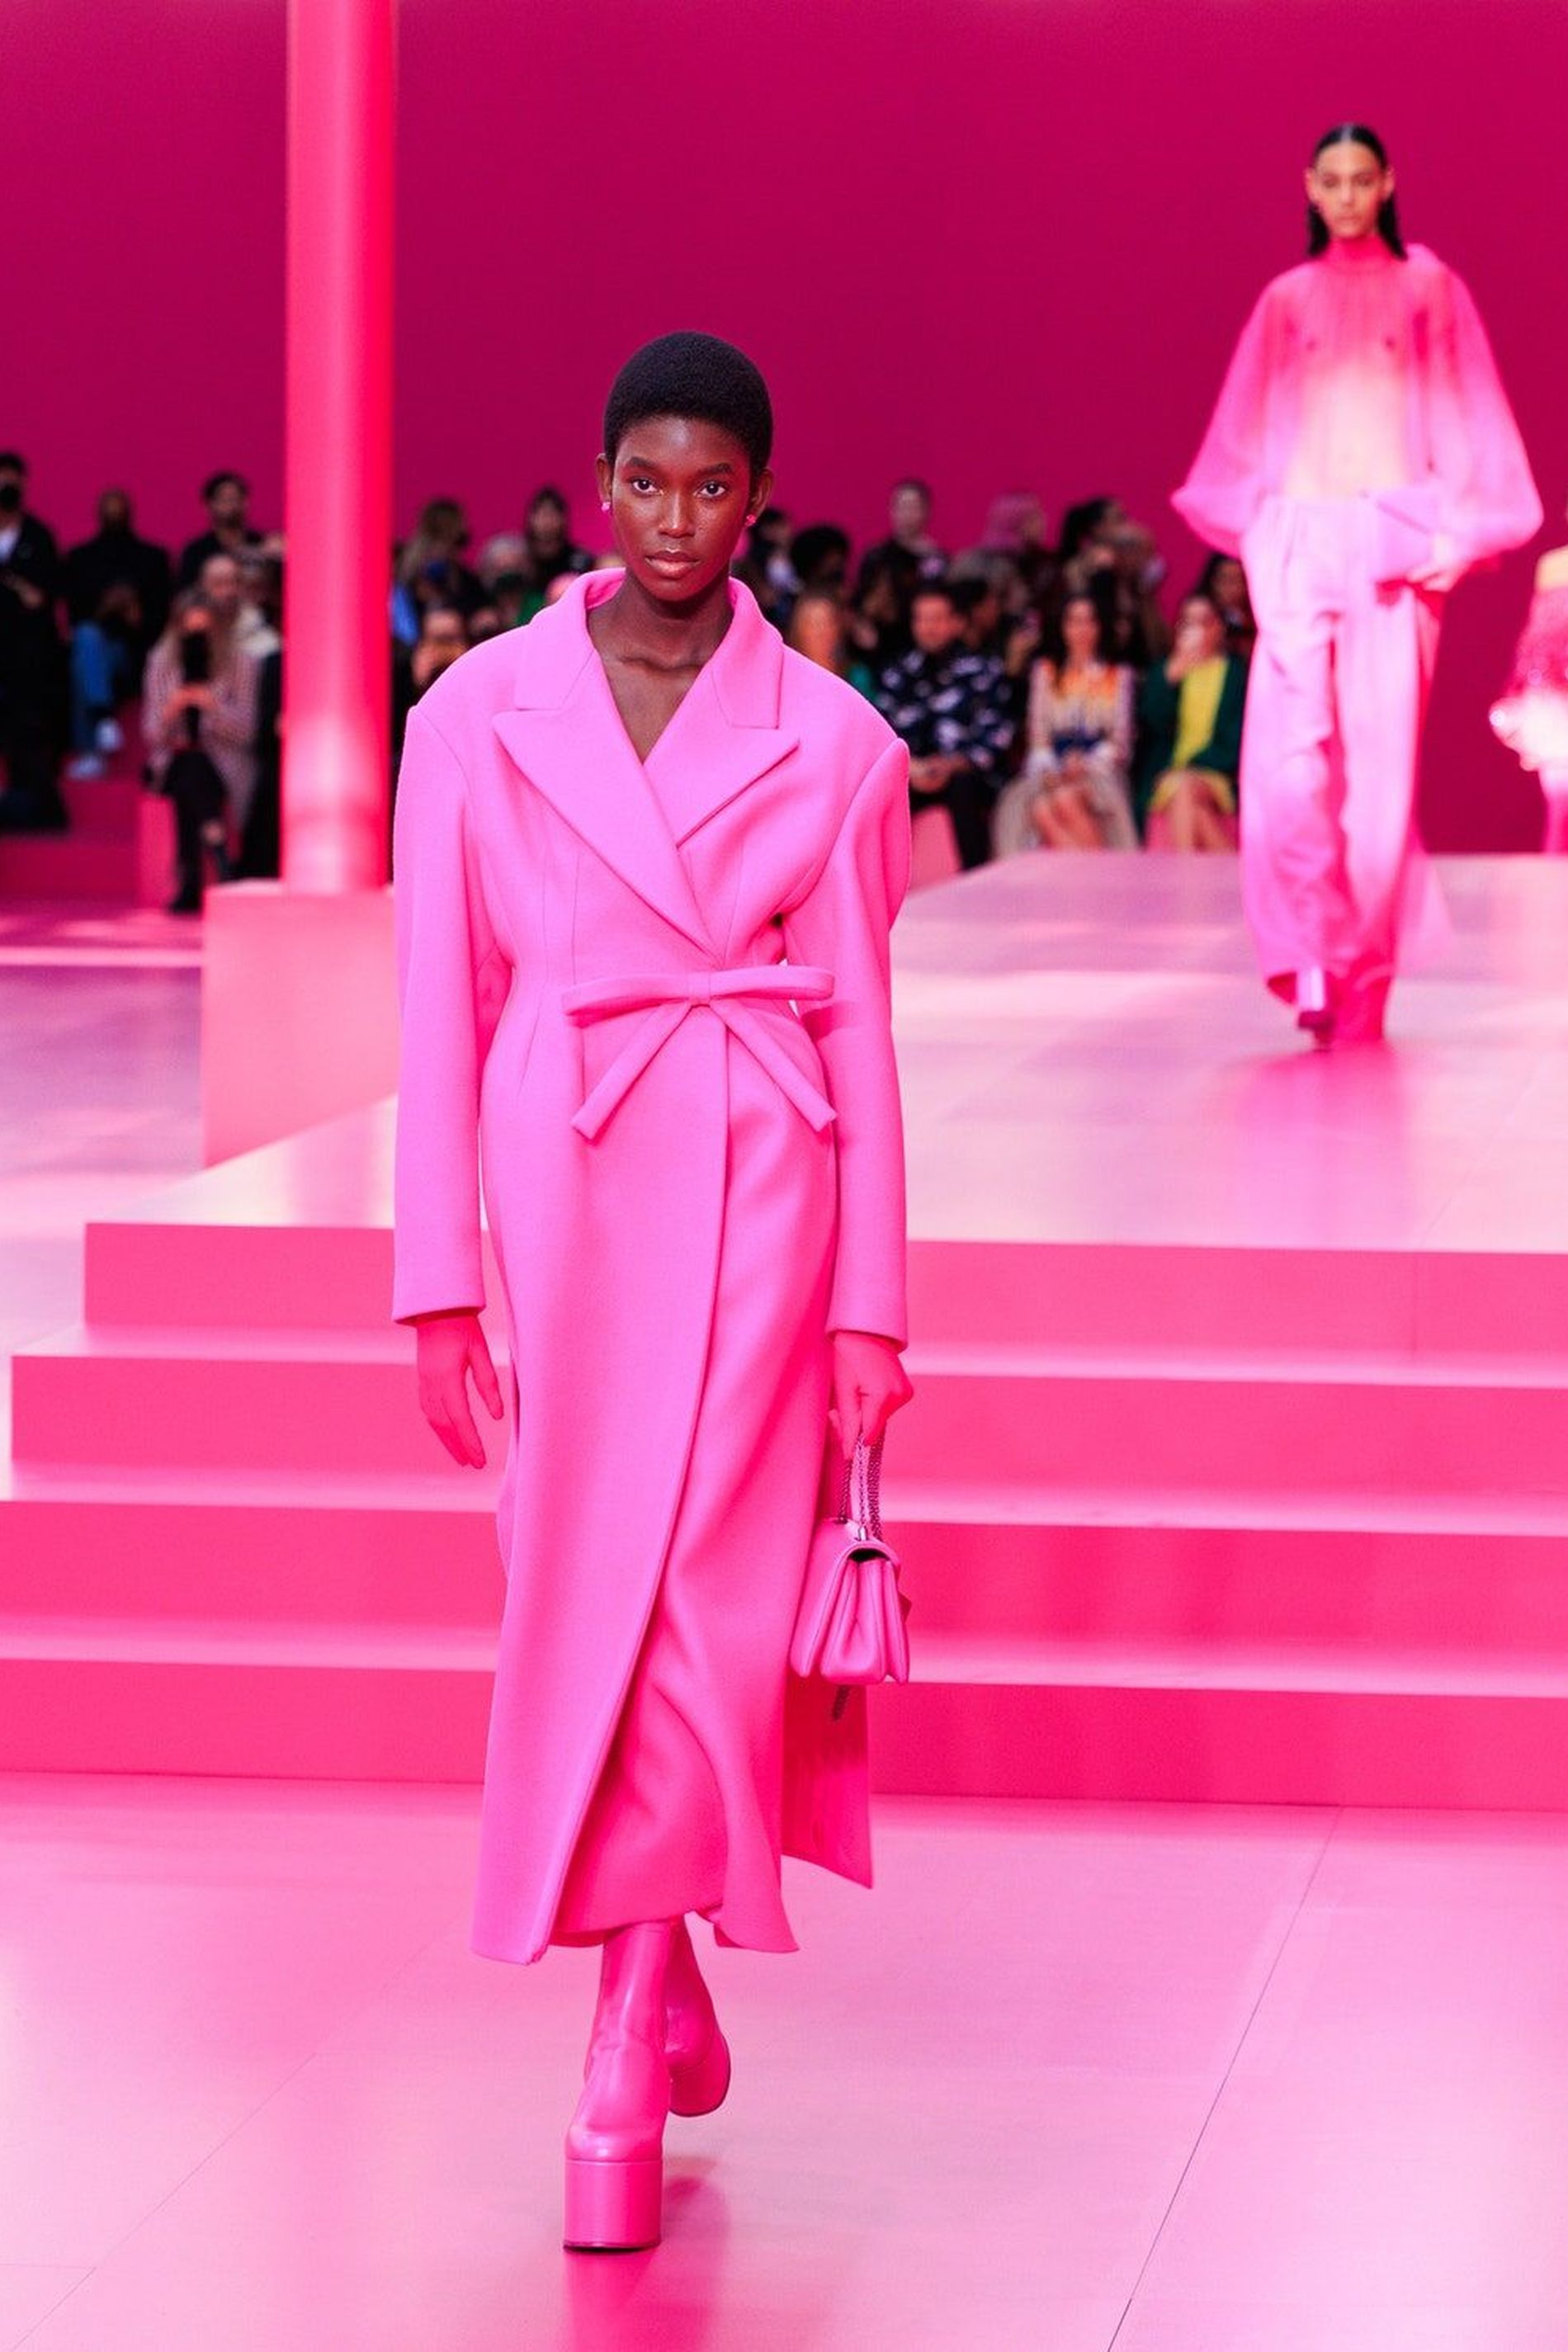 See all the Celebrities Who Have Worn the Valentino Pink PP Collection